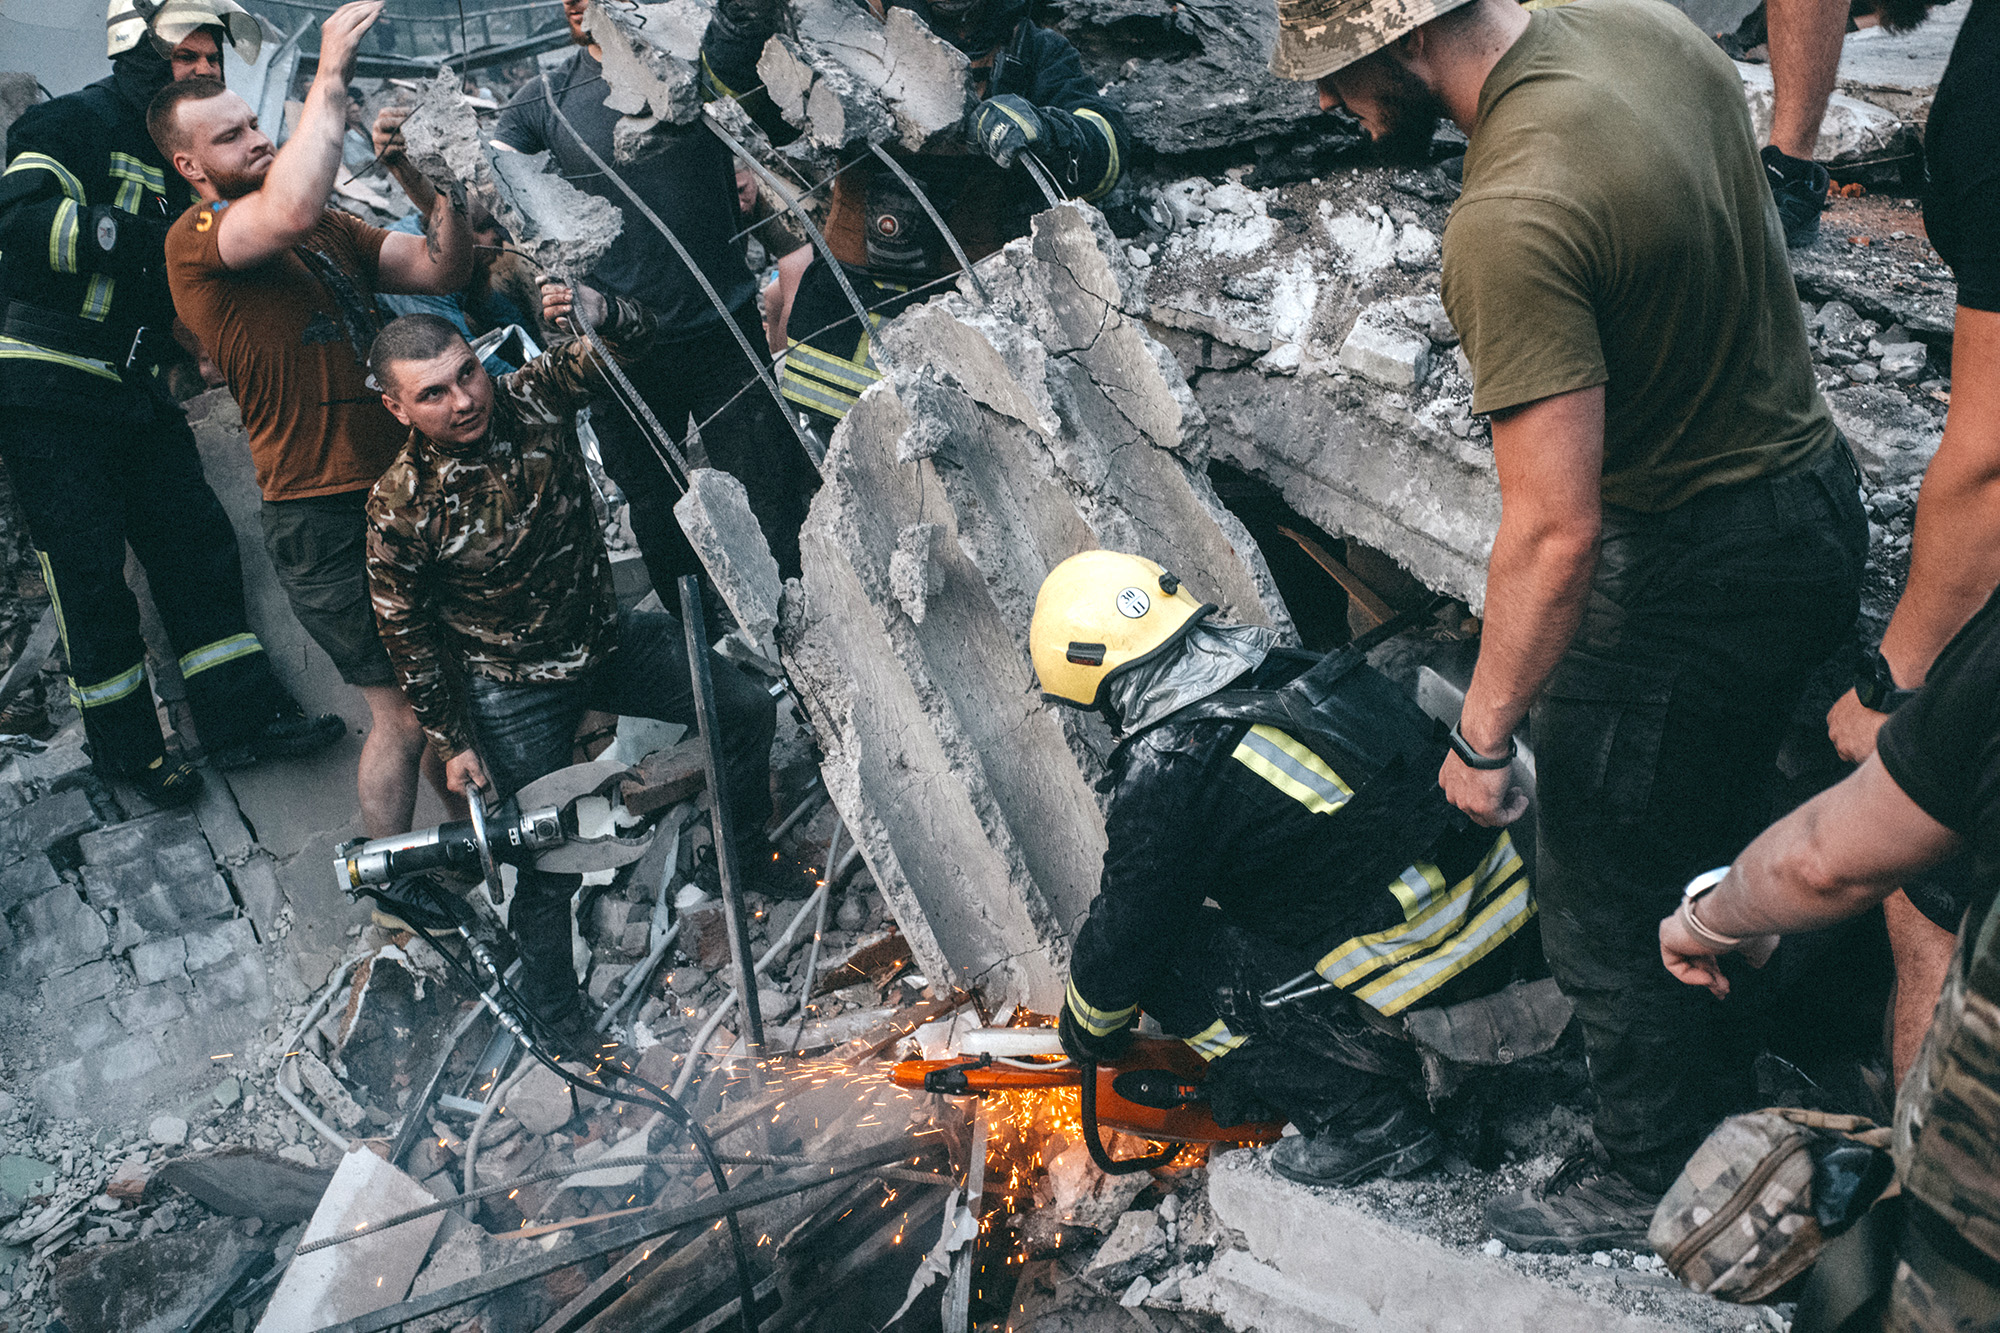 Search and rescue efforts after a Russian missile attack hit Ria Restaurant in Kramatorsk, Ukraine, on June 27.